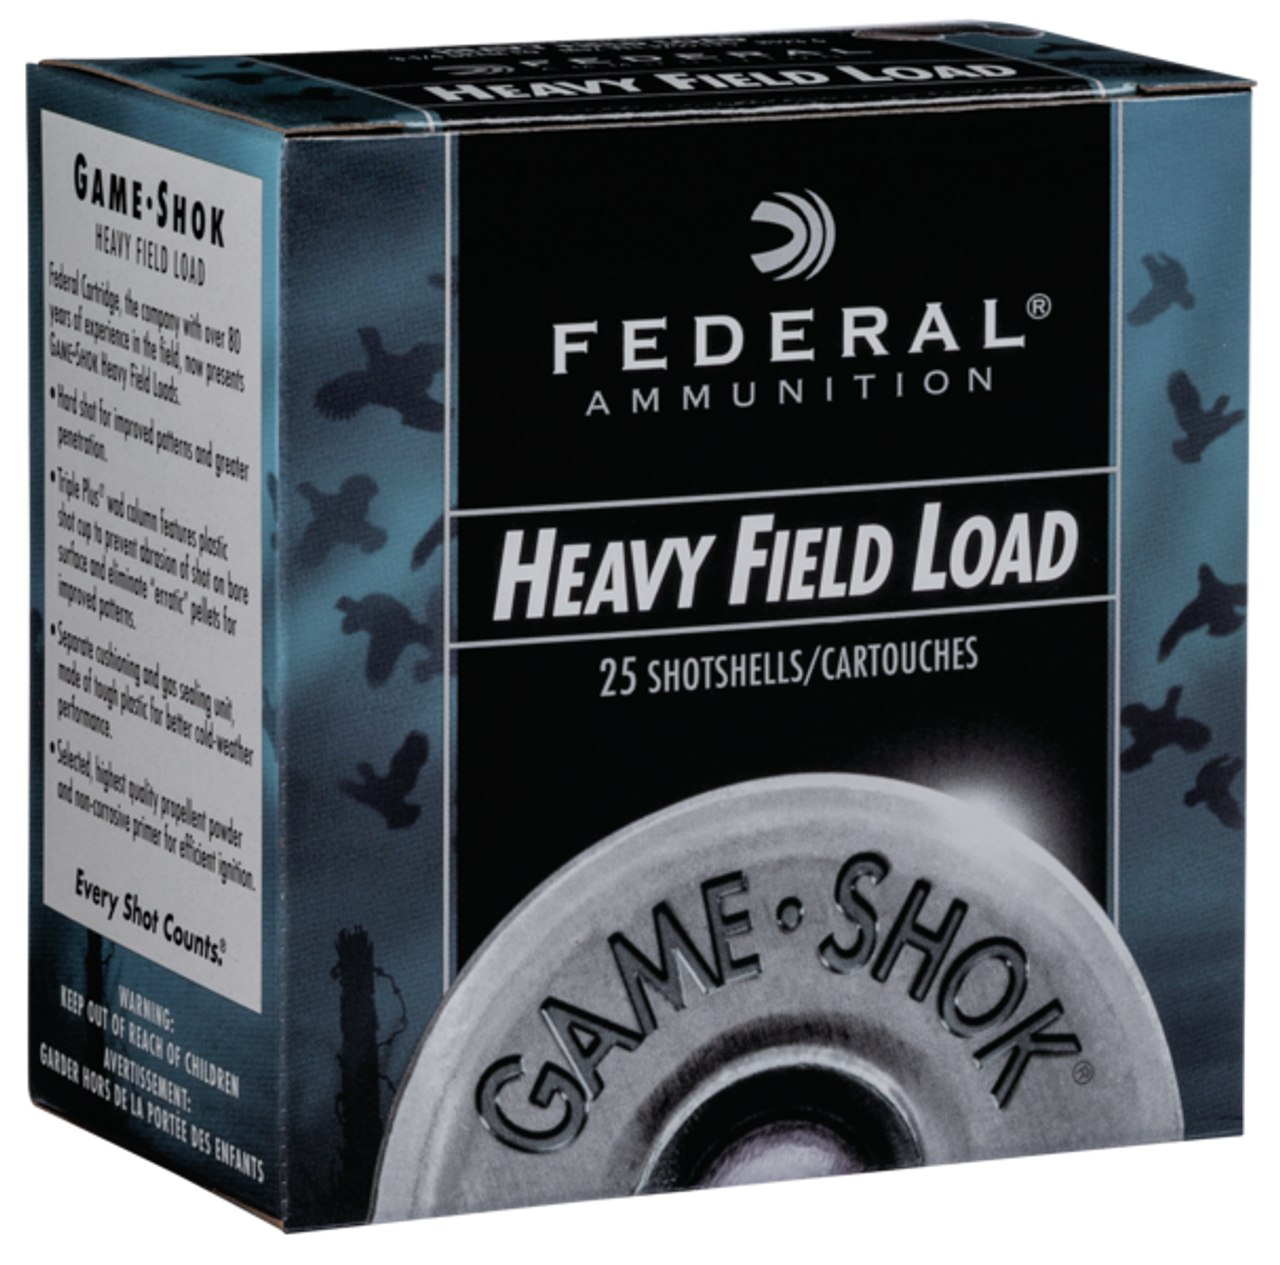 Specifications:
Type: Upland
Caliber: 12Ga
Shell Length: 2 3/4″
Shot Size: #4 Shot
Shot Load: 1 1/8oz
Muzzle Velocity: 1255 FPS
Package Quantity: 250 rounds
